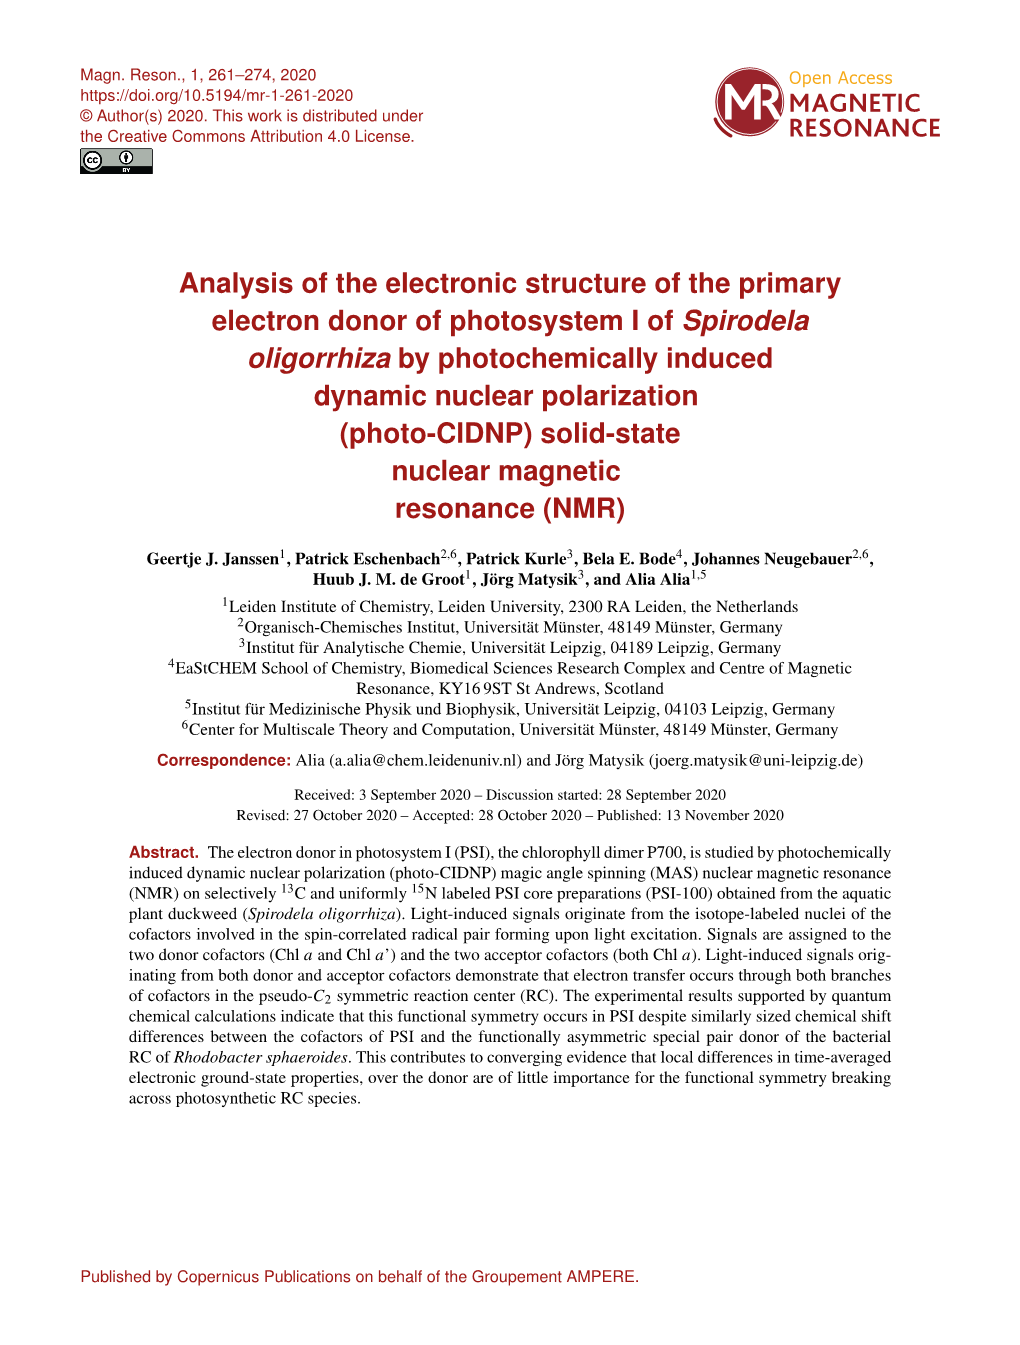 Analysis of the Electronic Structure of the Primary